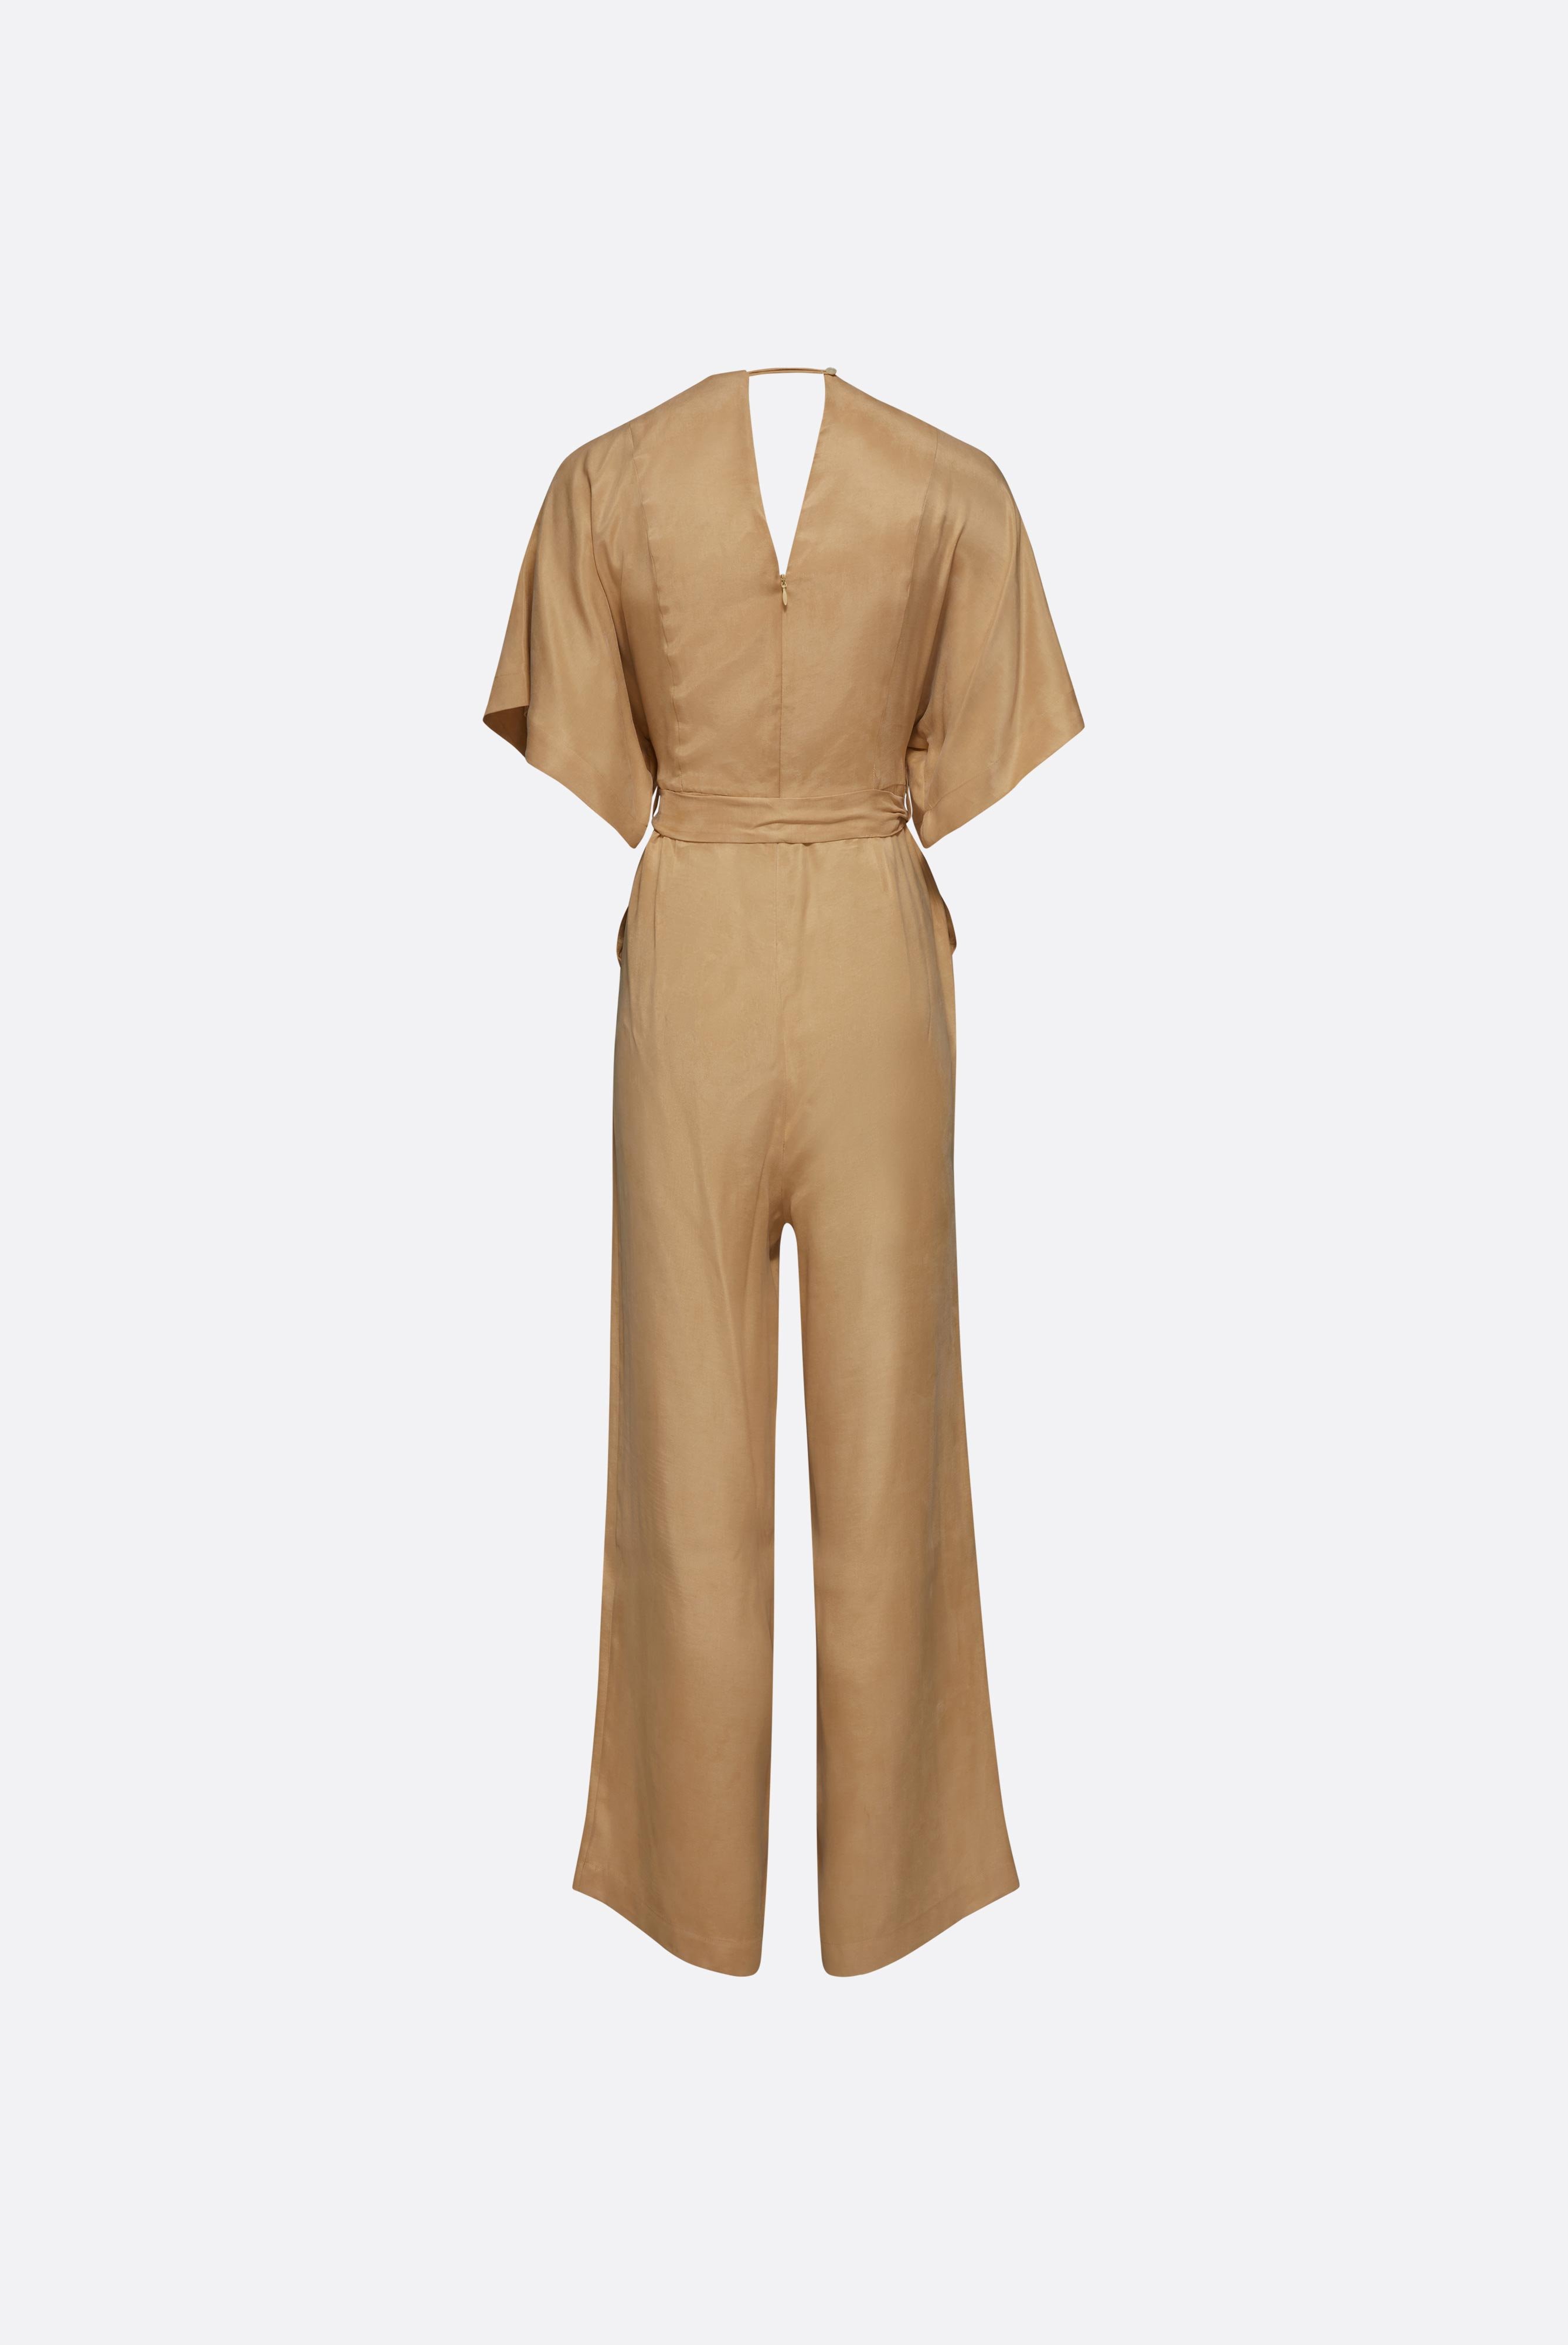 Jeans & Trousers+Jumpsuit with wide Sleeves+05.658Q.22.155007.250.34